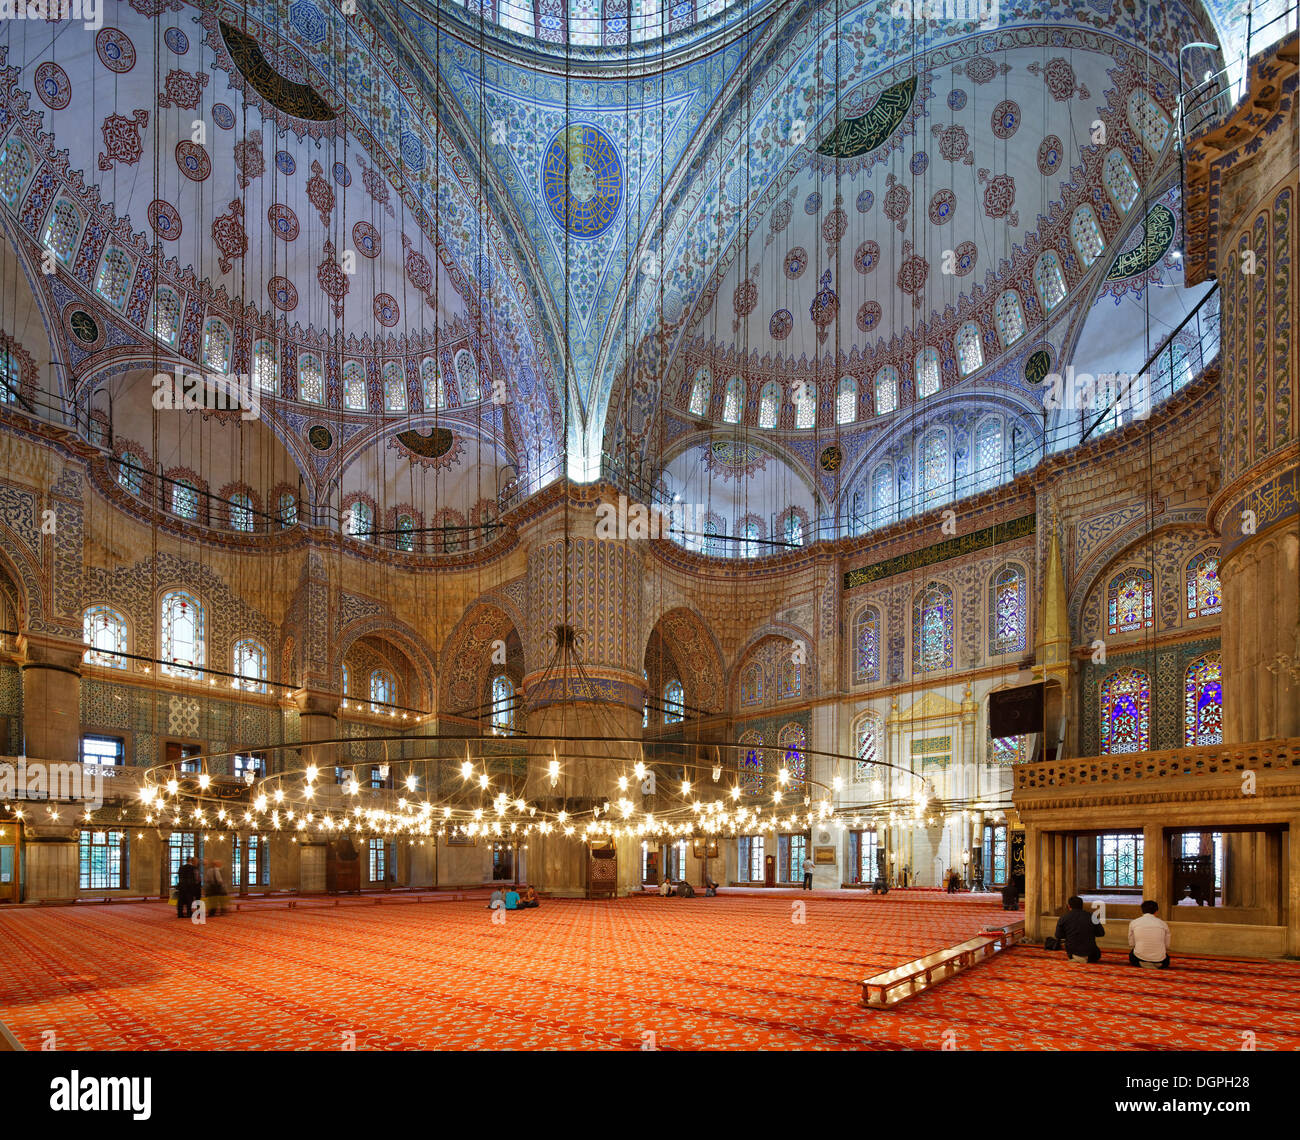 Inside The Sultan Ahmed Mosque Stock Photos Inside The